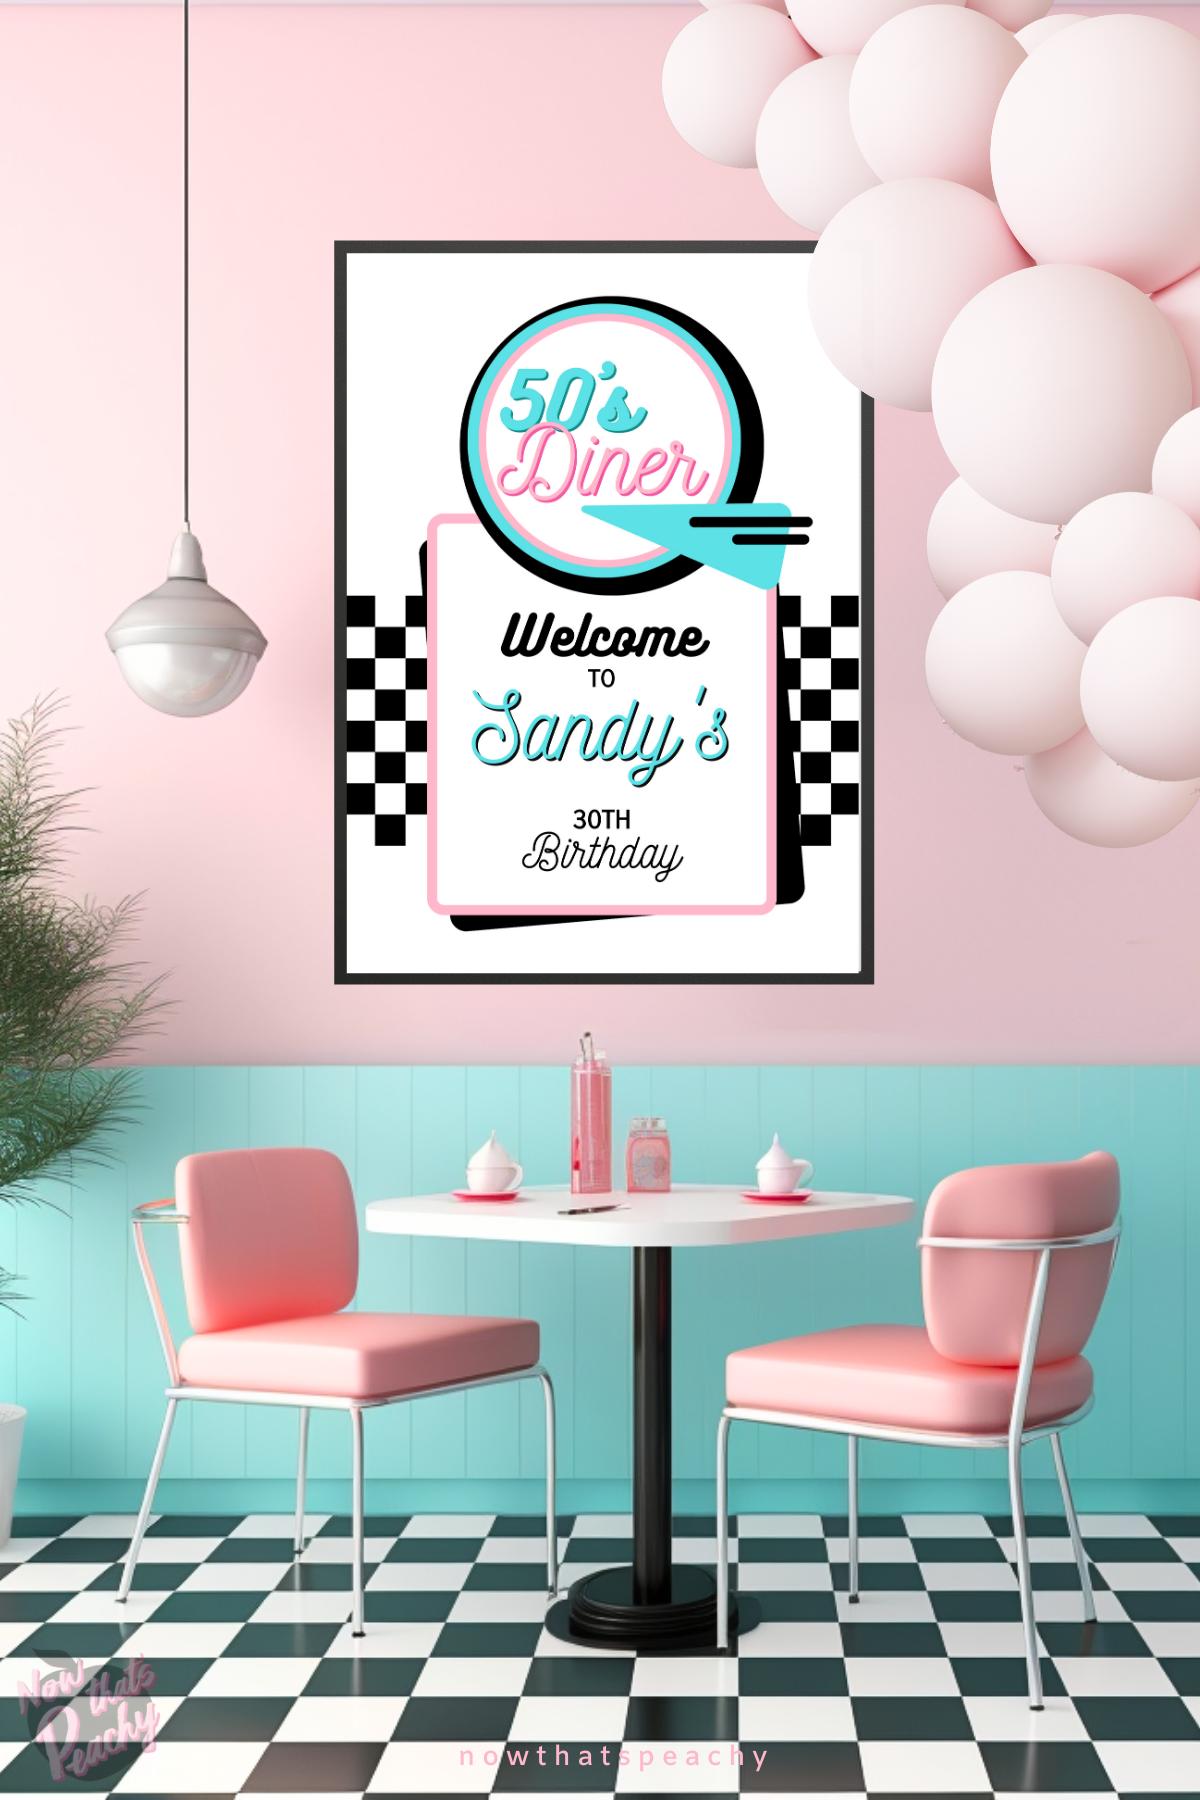 Personalised Welcome Sign Poster Diner, Grease, the 1950s, Soda Hop, Music, Retro or Rock'n'Roll  custom editable Welcome sign decorating instant Digital Download  Diner Soda Hop Welcome Template to Download edit  Print at home.  USE FOR  Birthday Parties 16th, 18th, 21st, 30th, 40th, 50th, 60th, 70th etc Birthday Themed Parties GREASE, The Fifties, Rock'n'Roll, Soda Hop, Greaser, Movies, Diner, Retro, Music etc Bachelorette Hens Parties Ladies, sockhop theme